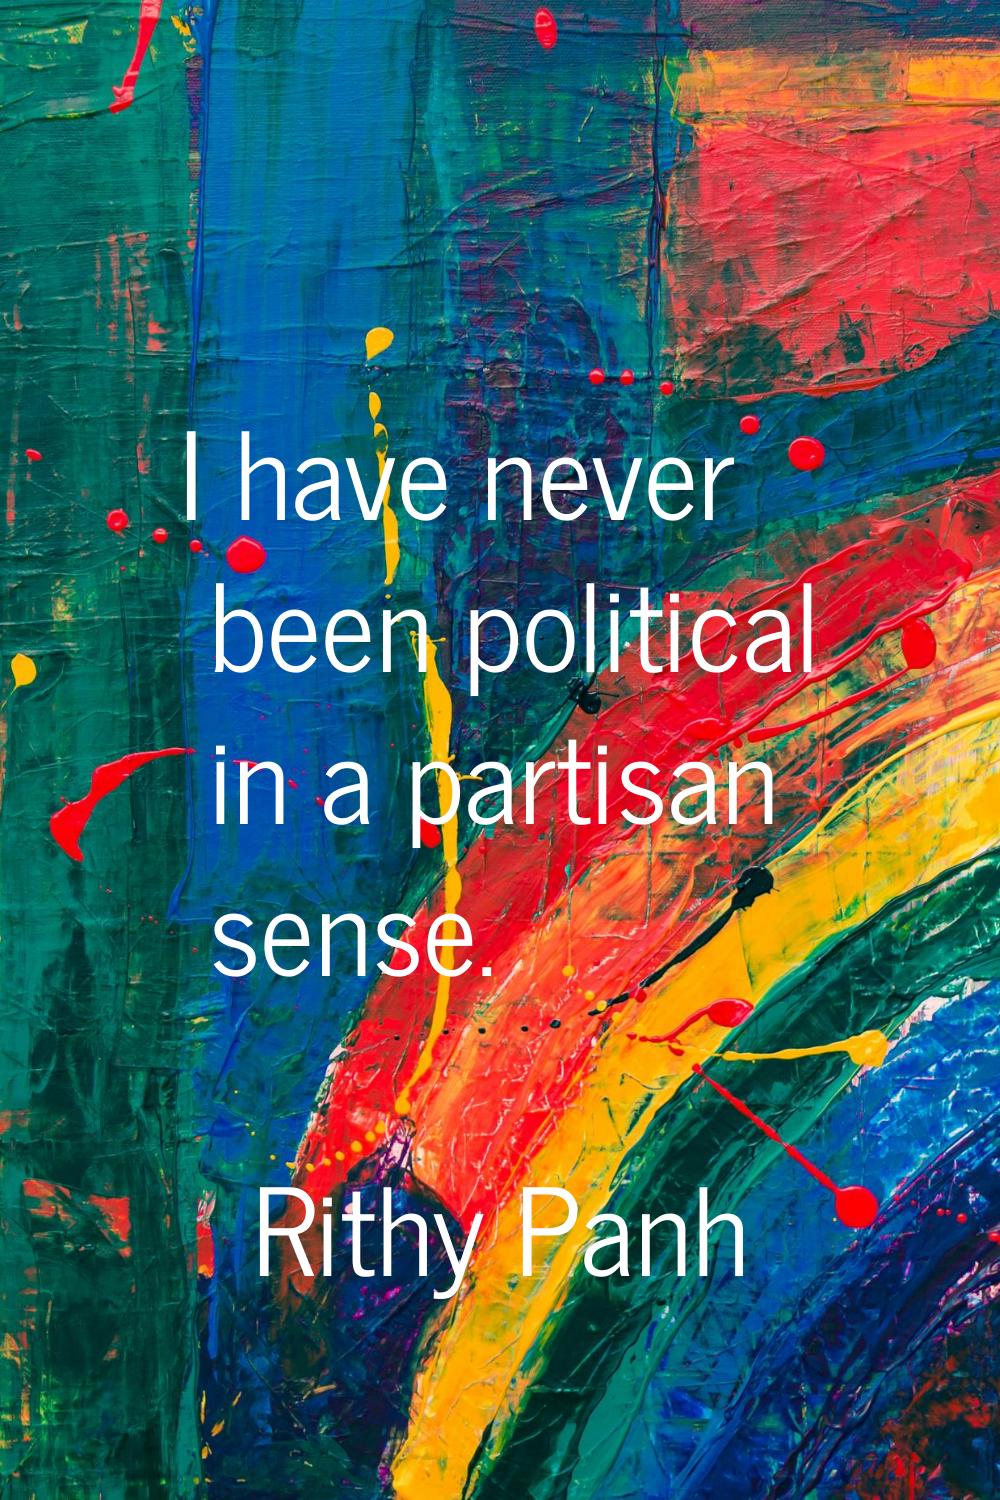 I have never been political in a partisan sense.